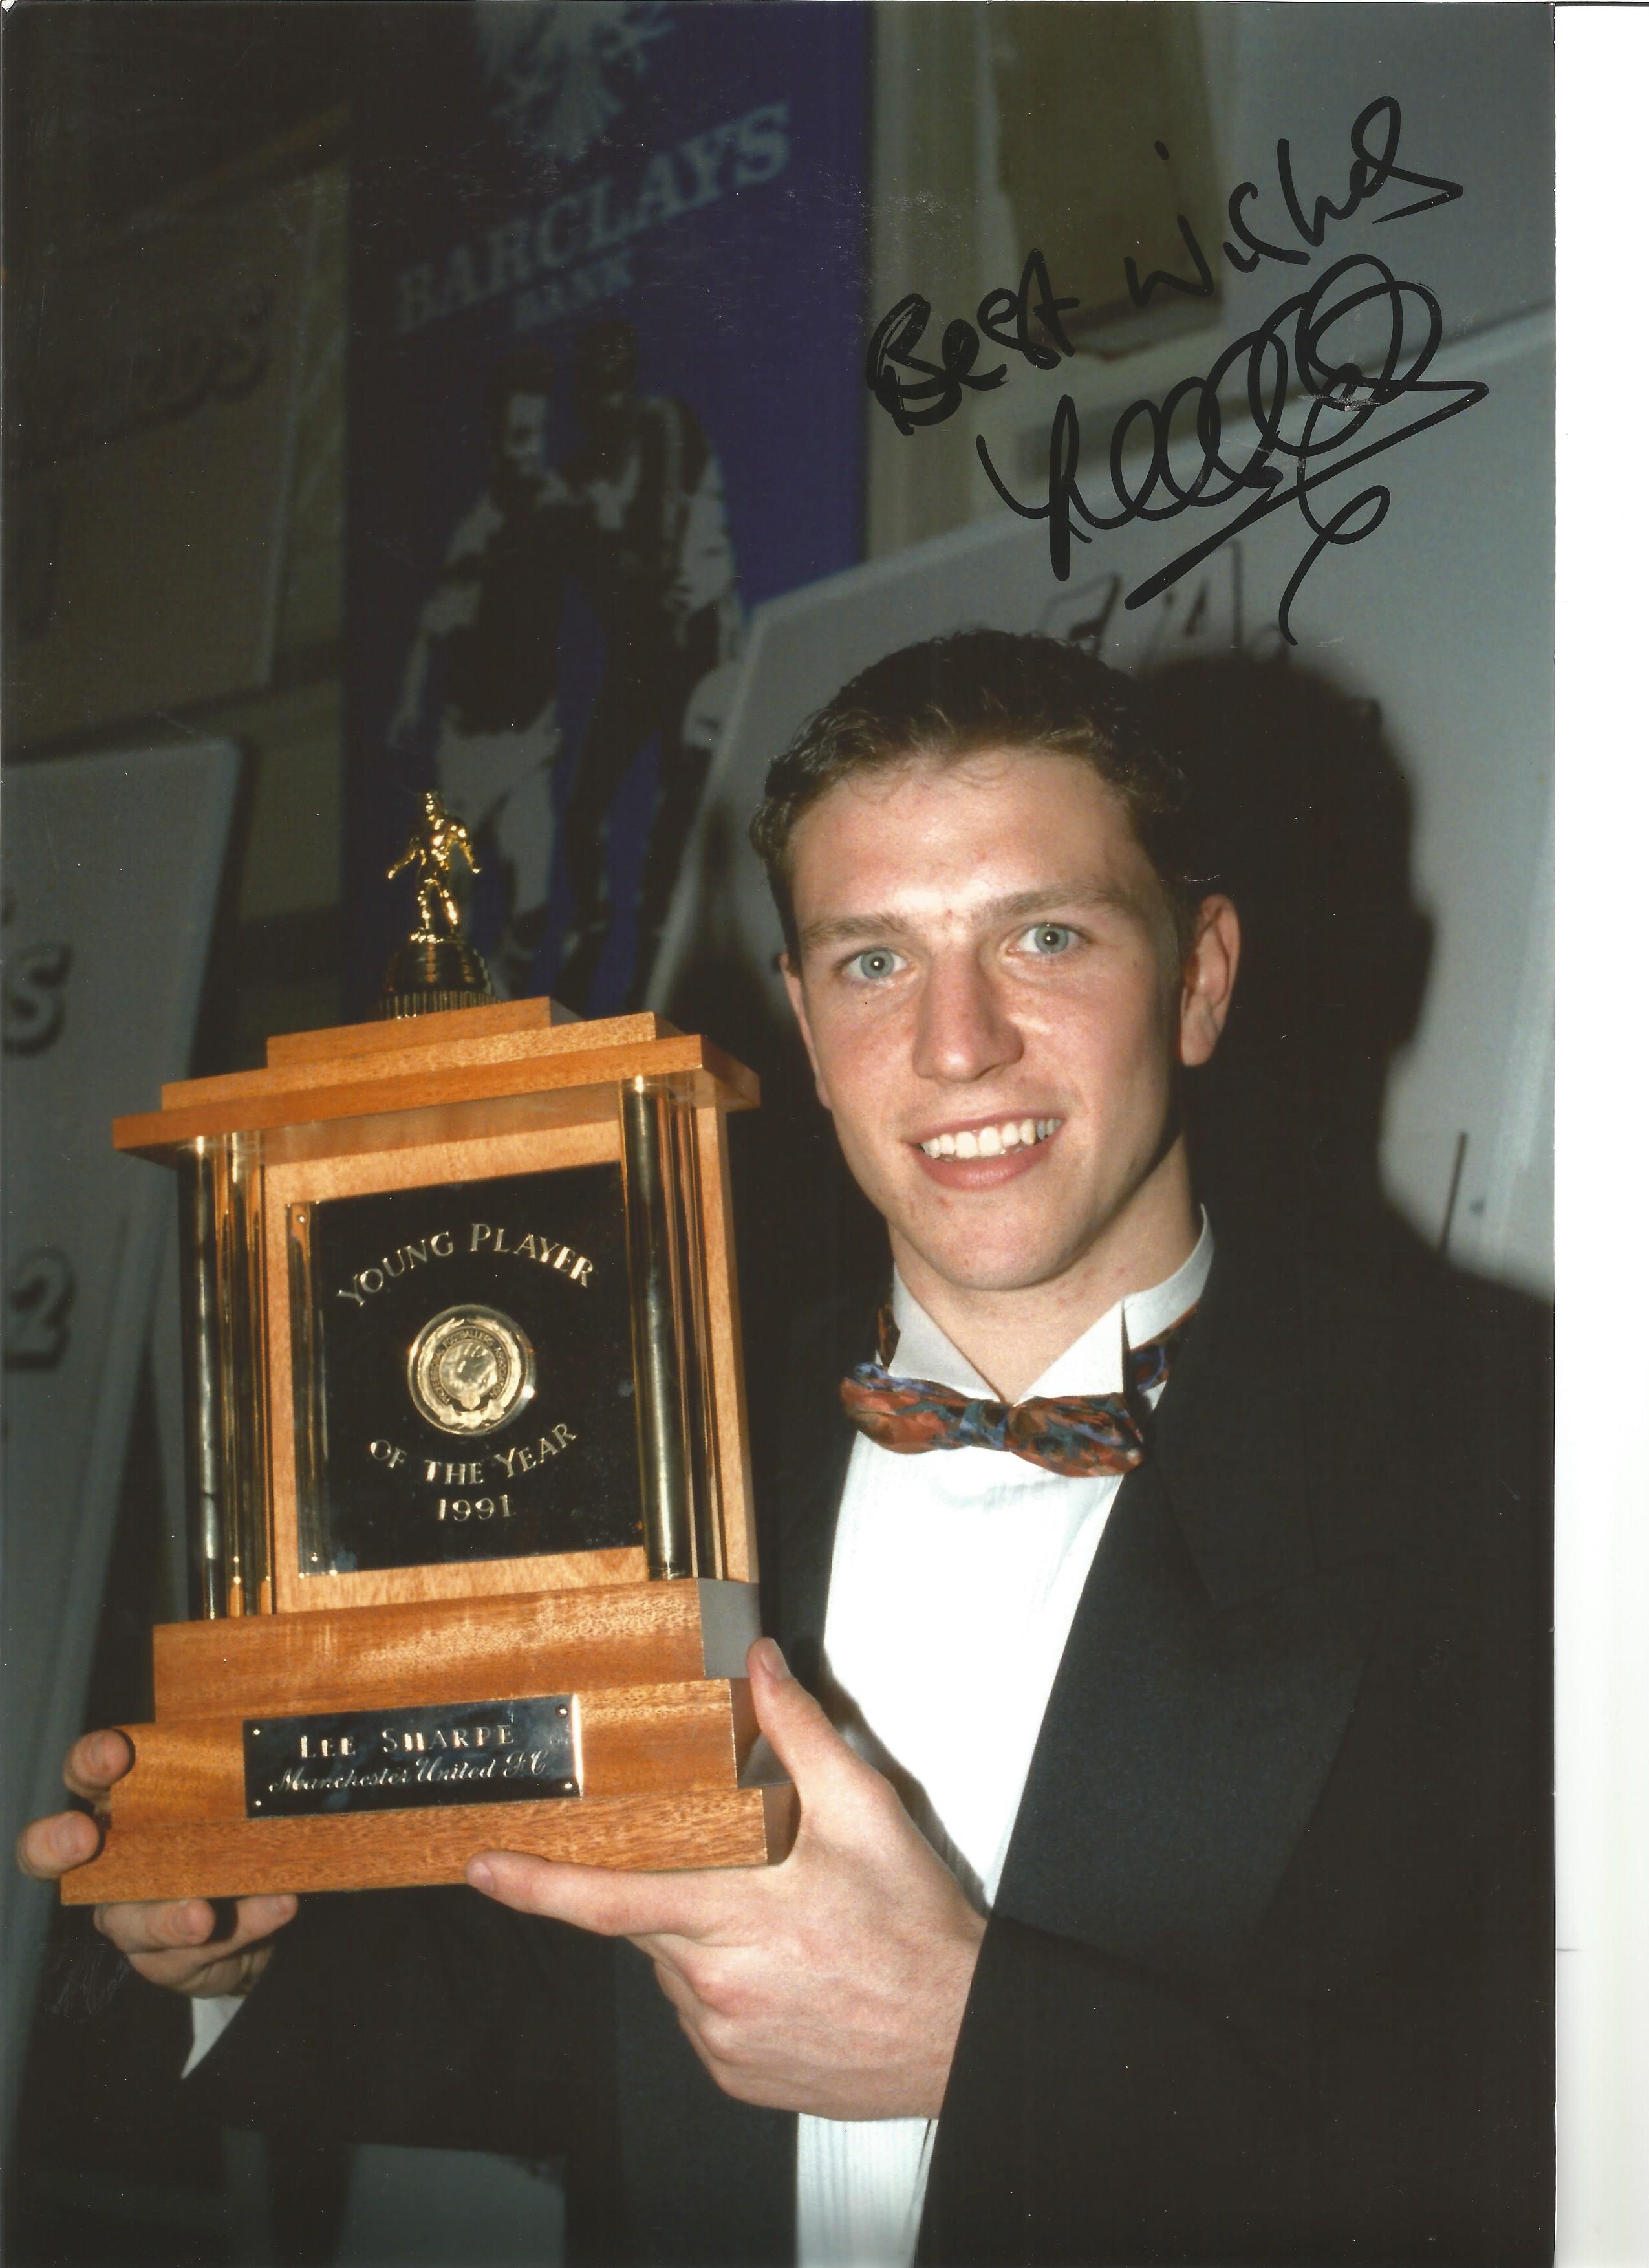 Lee Sharpe Man United Signed 12 x 8 inch football photo. Good Condition. All autographs are